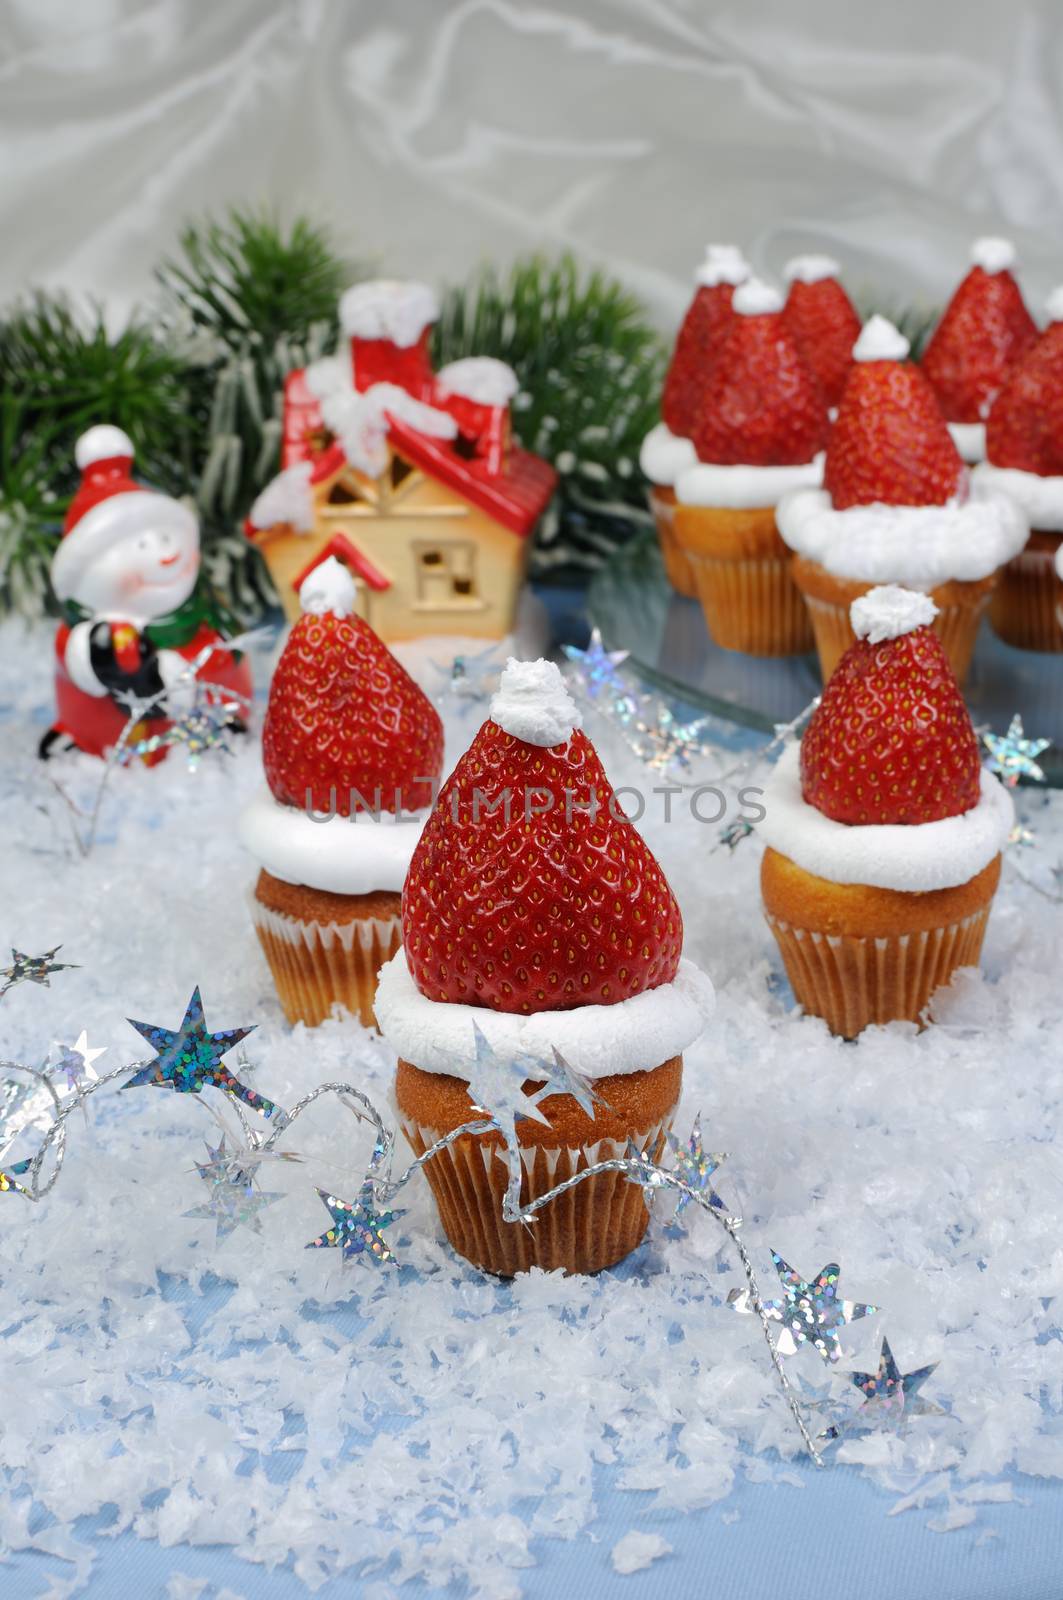 strawberries with whipped cream in the form of a Christmas hat on a muffin